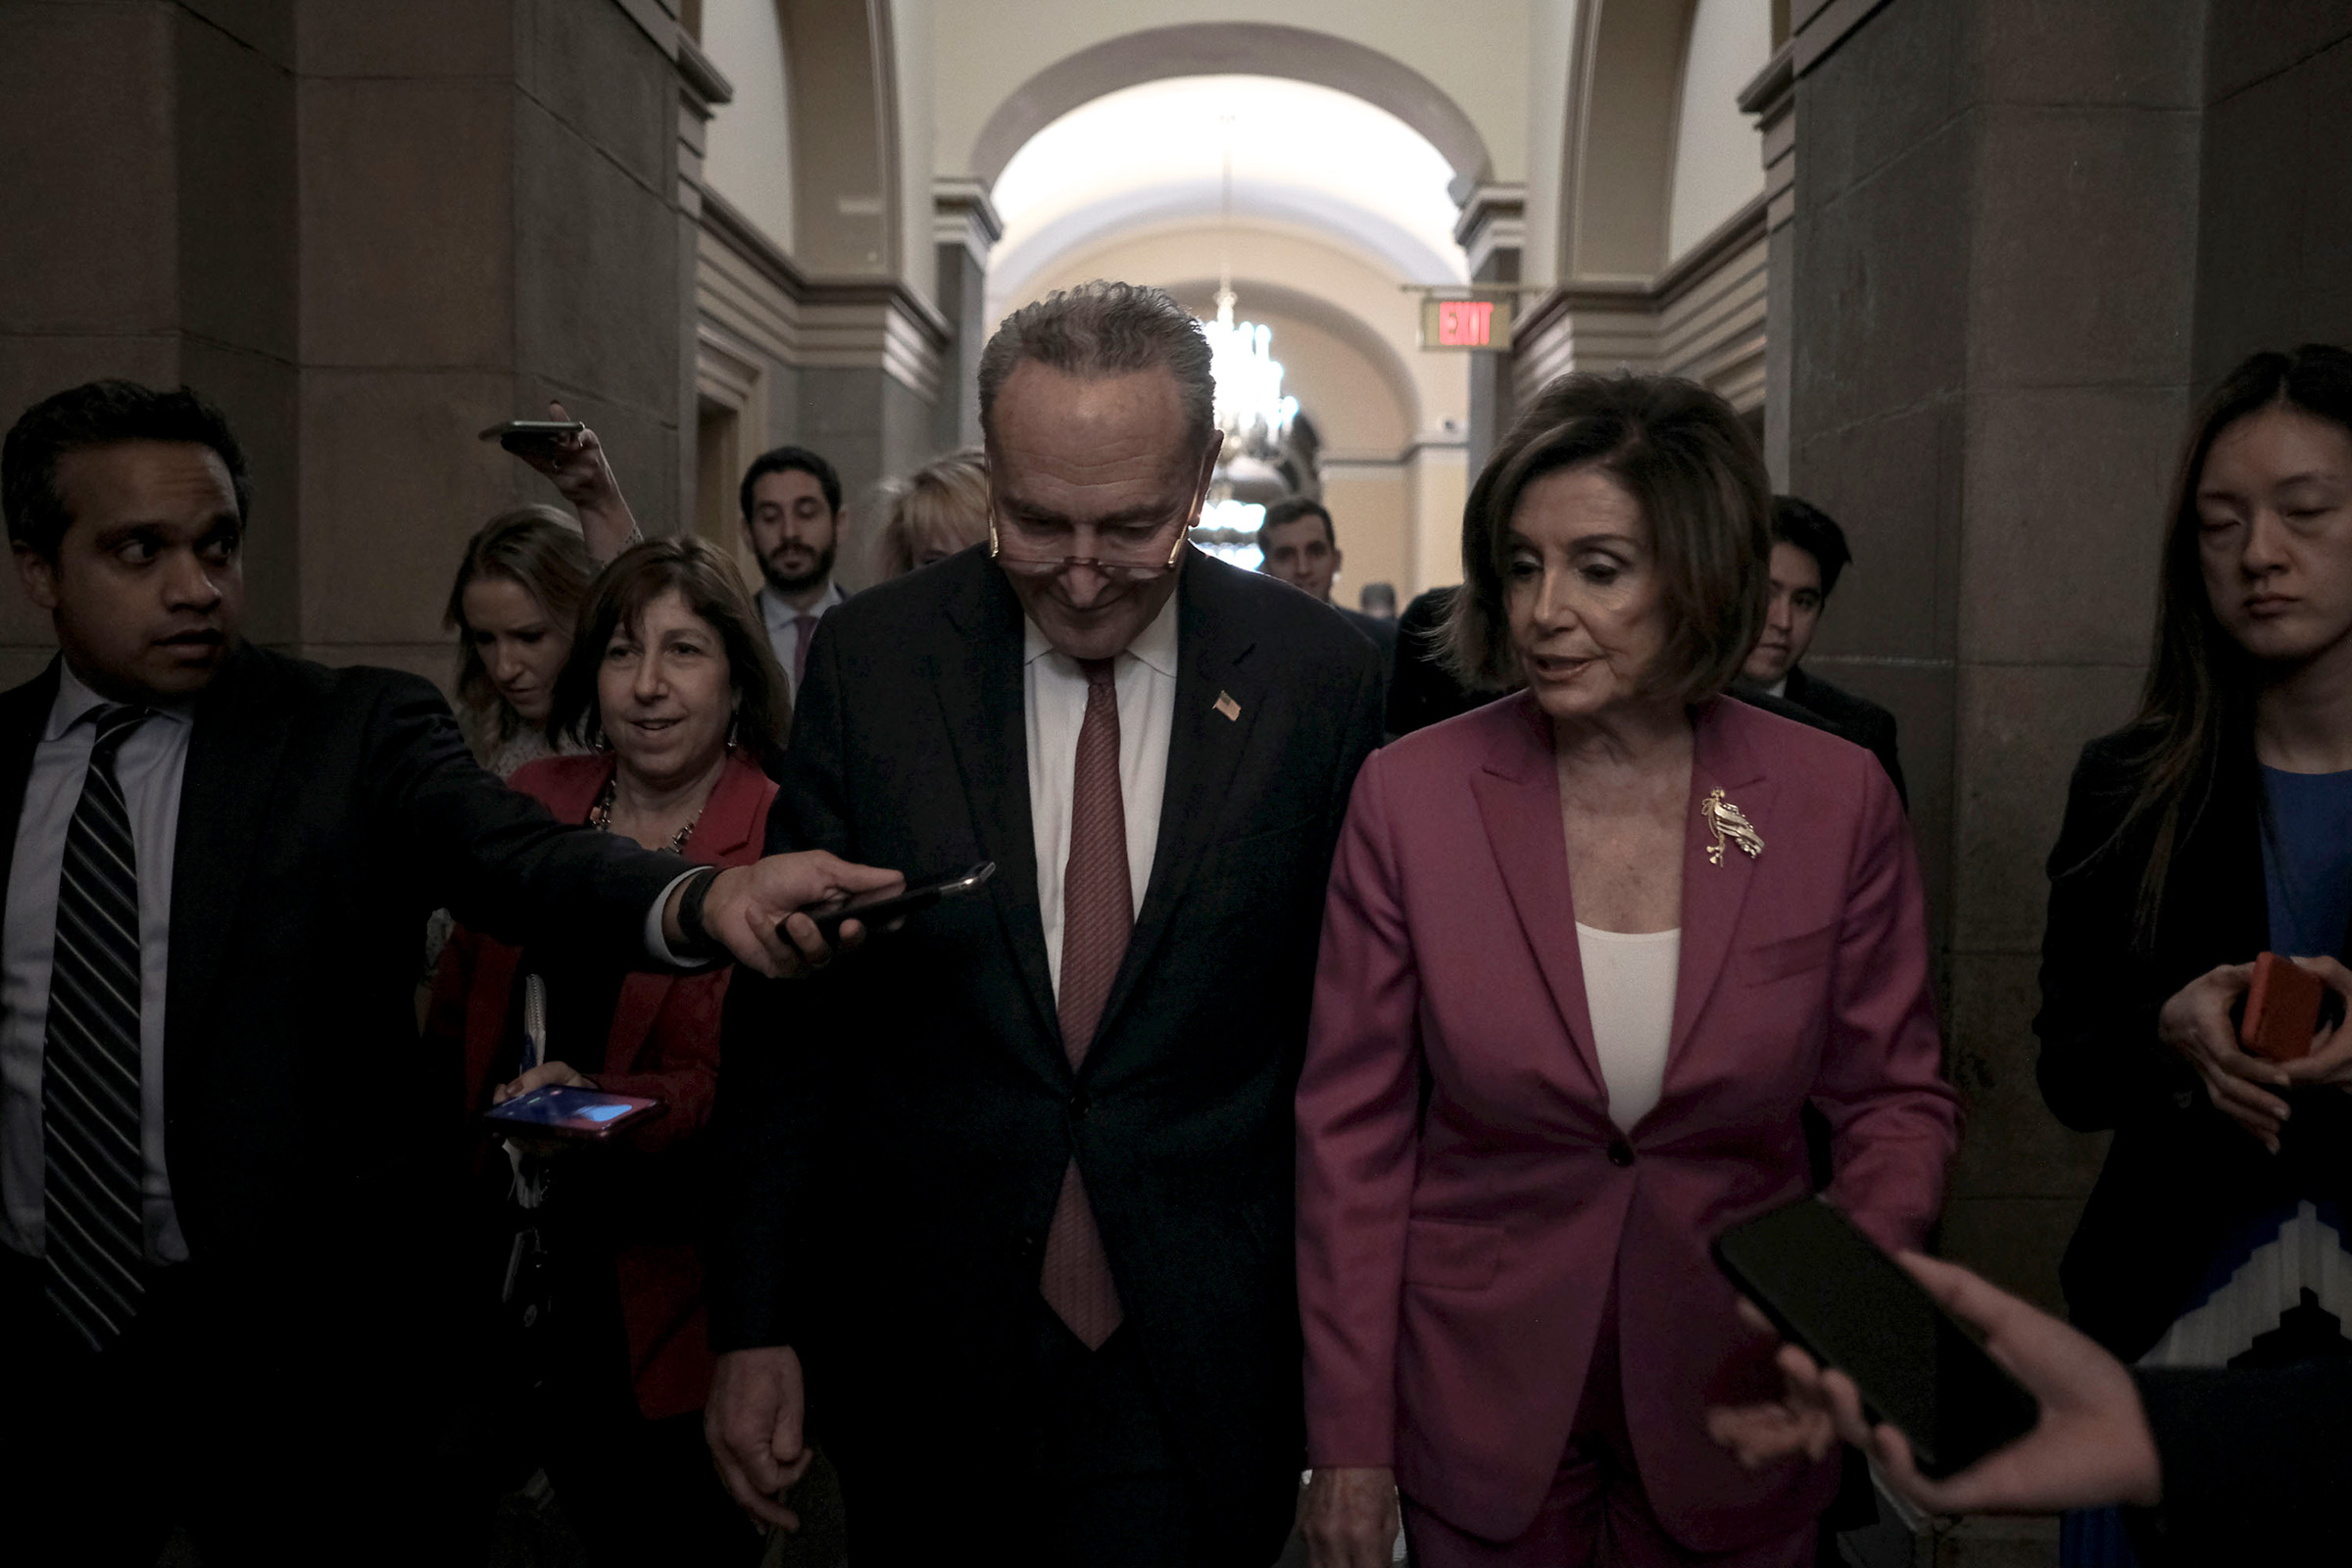 Senate Minority Leader Chuck Schumer and Speaker Nancy Pelosi leave a press conference on lowering the price for healthcare in anticipation to President Trump's State of the Union address at the Capitol in Washington, D.C., Feb. 4, 2020. (Gabriella Demczuk for TIME)